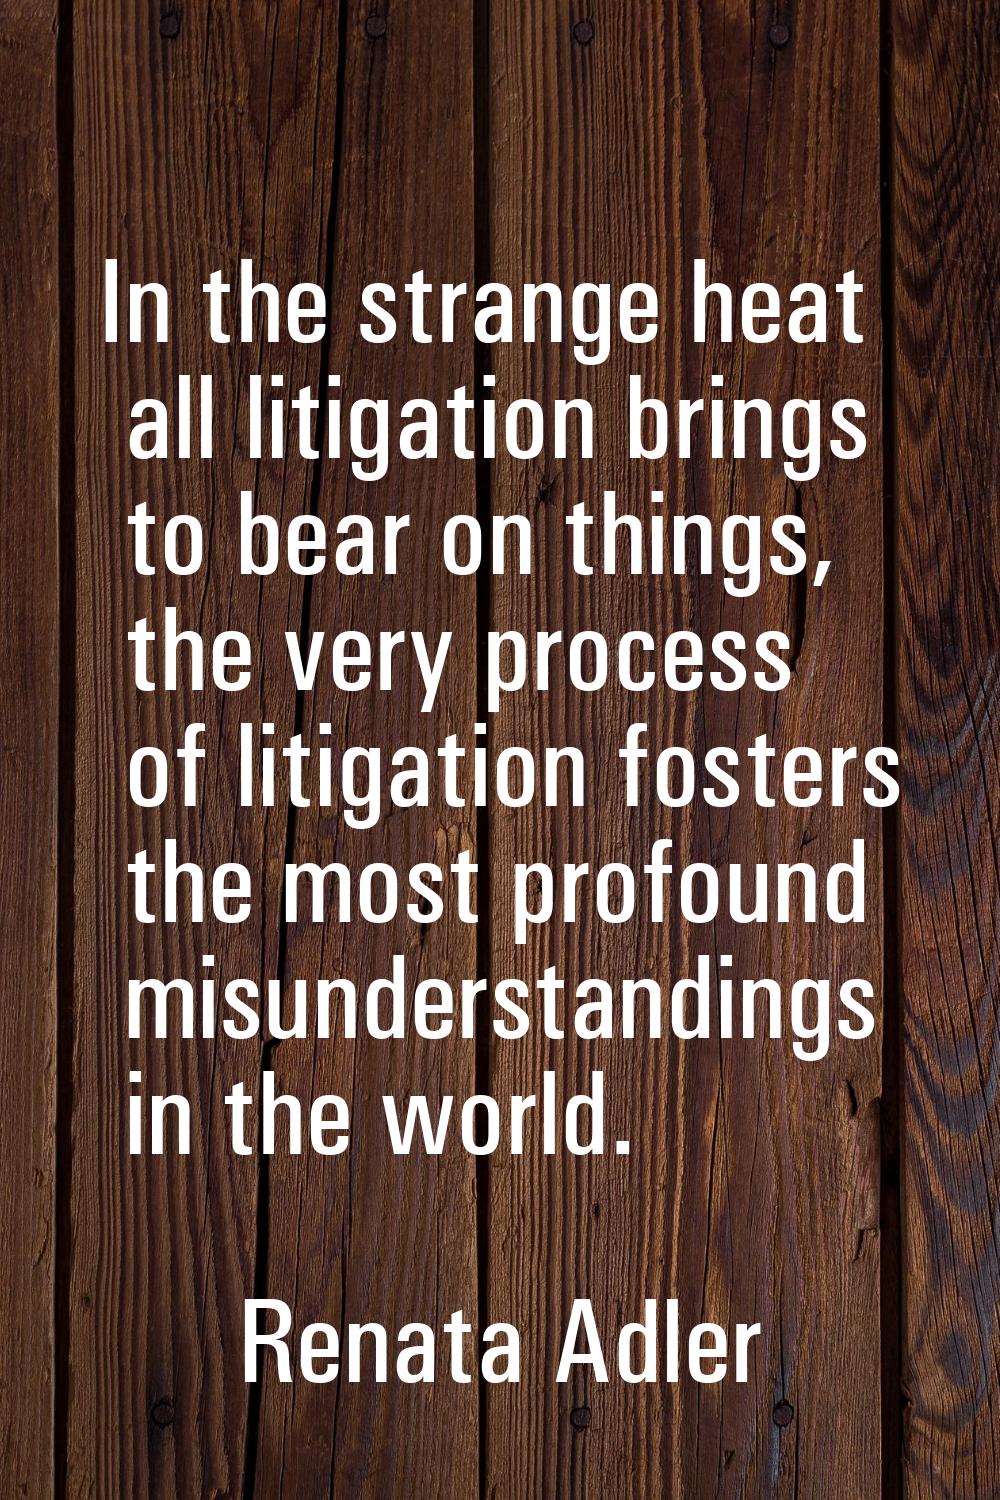 In the strange heat all litigation brings to bear on things, the very process of litigation fosters